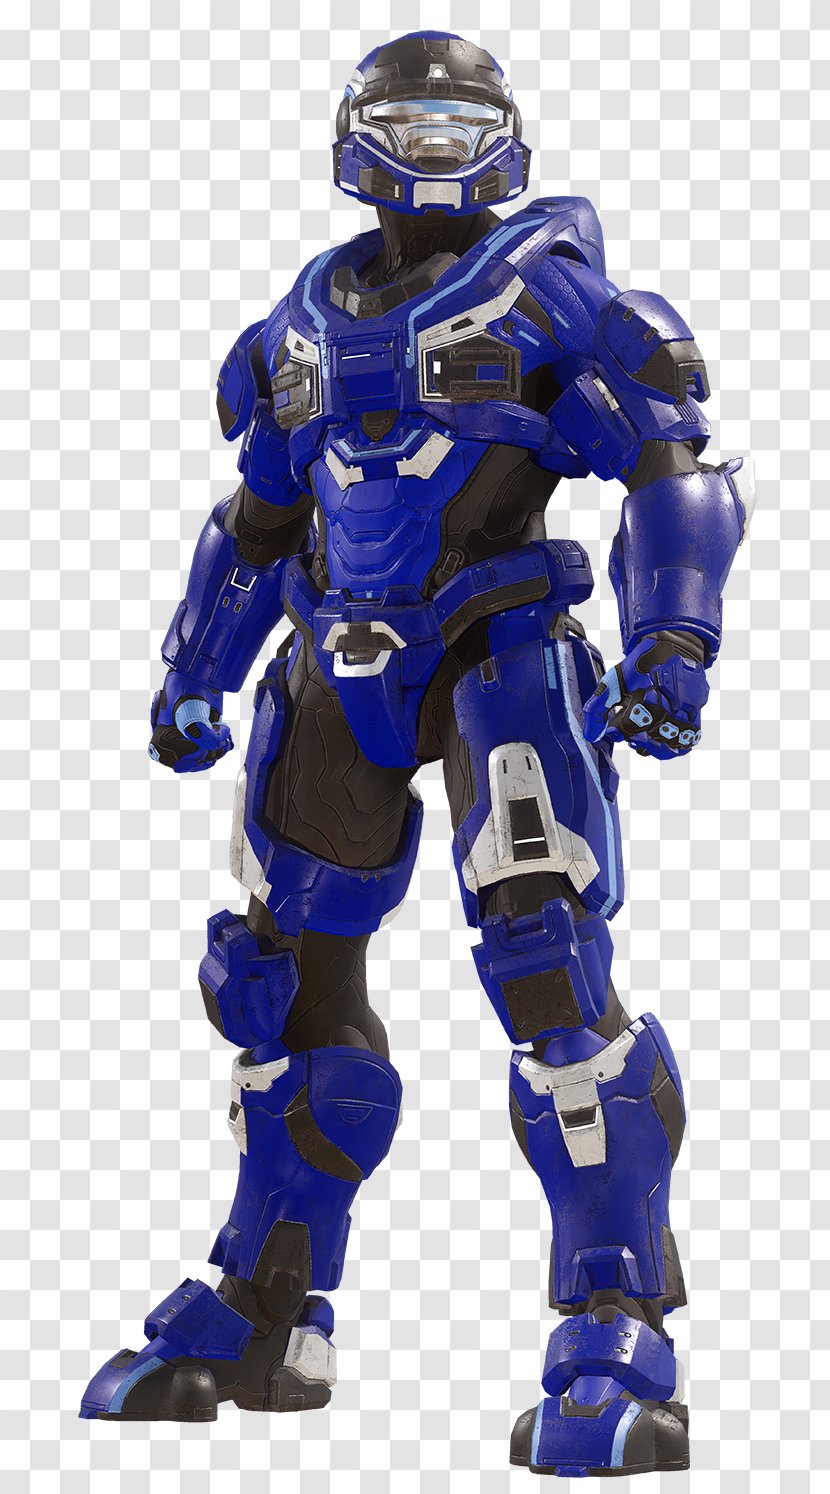 Halo 5: Guardians Halo: Reach Master Chief Combat Evolved 4 - 343 Industries Transparent PNG